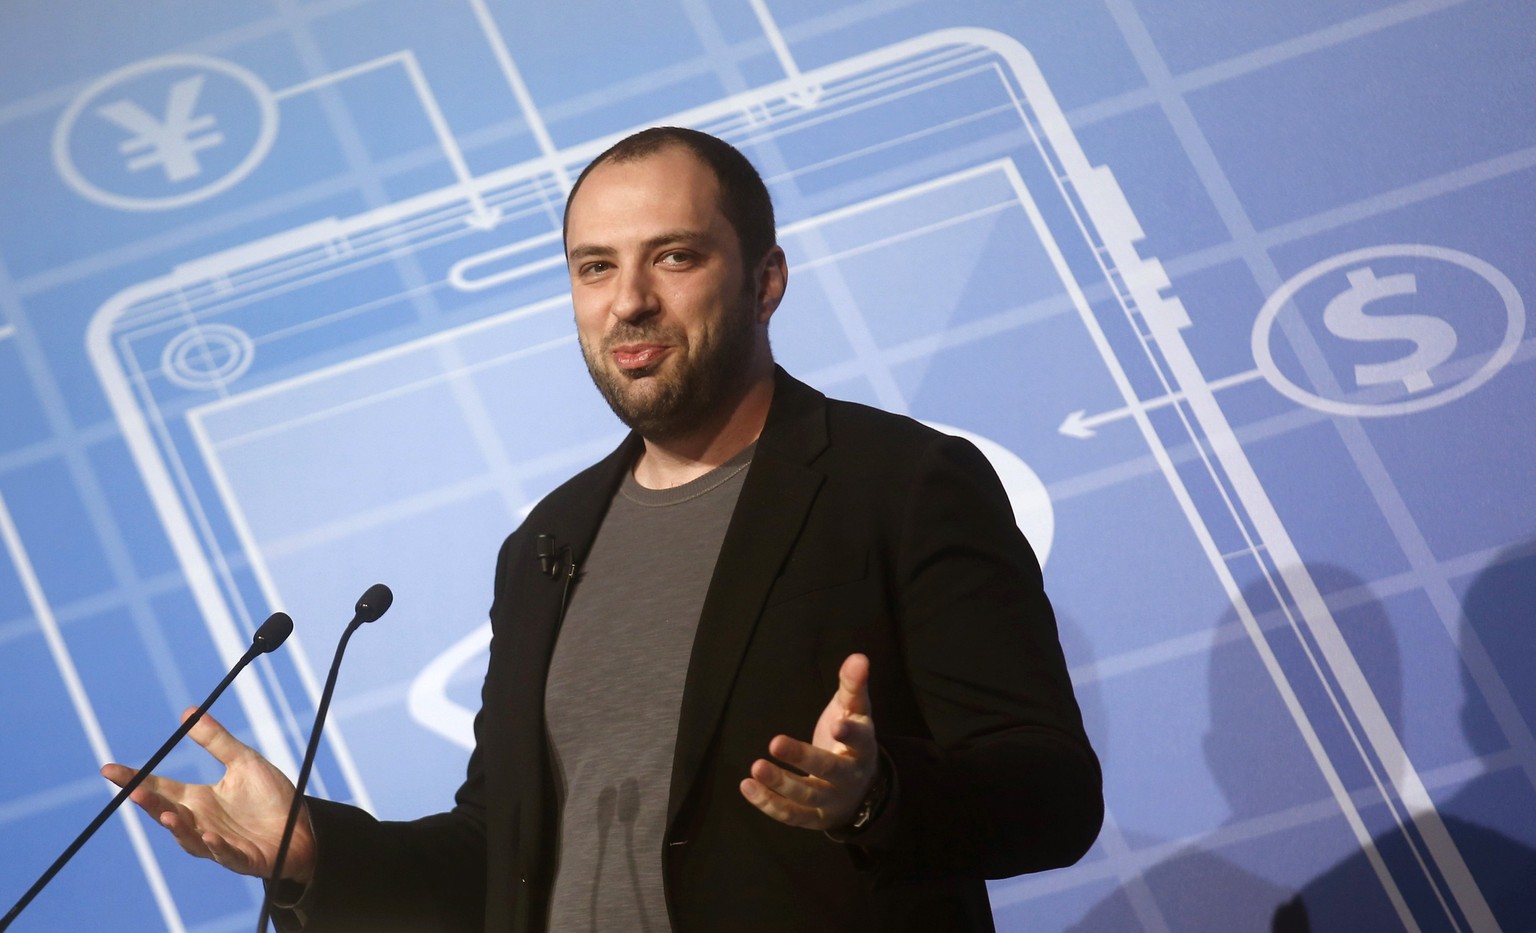 REFILE - CORRECTING TYPO
WhatsApp Chief Executive Officer and co-founder Jan Koum delivers a keynote speech at the Mobile World Congress
in Barcelona February 24, 2014. The world's biggest messaging  ...